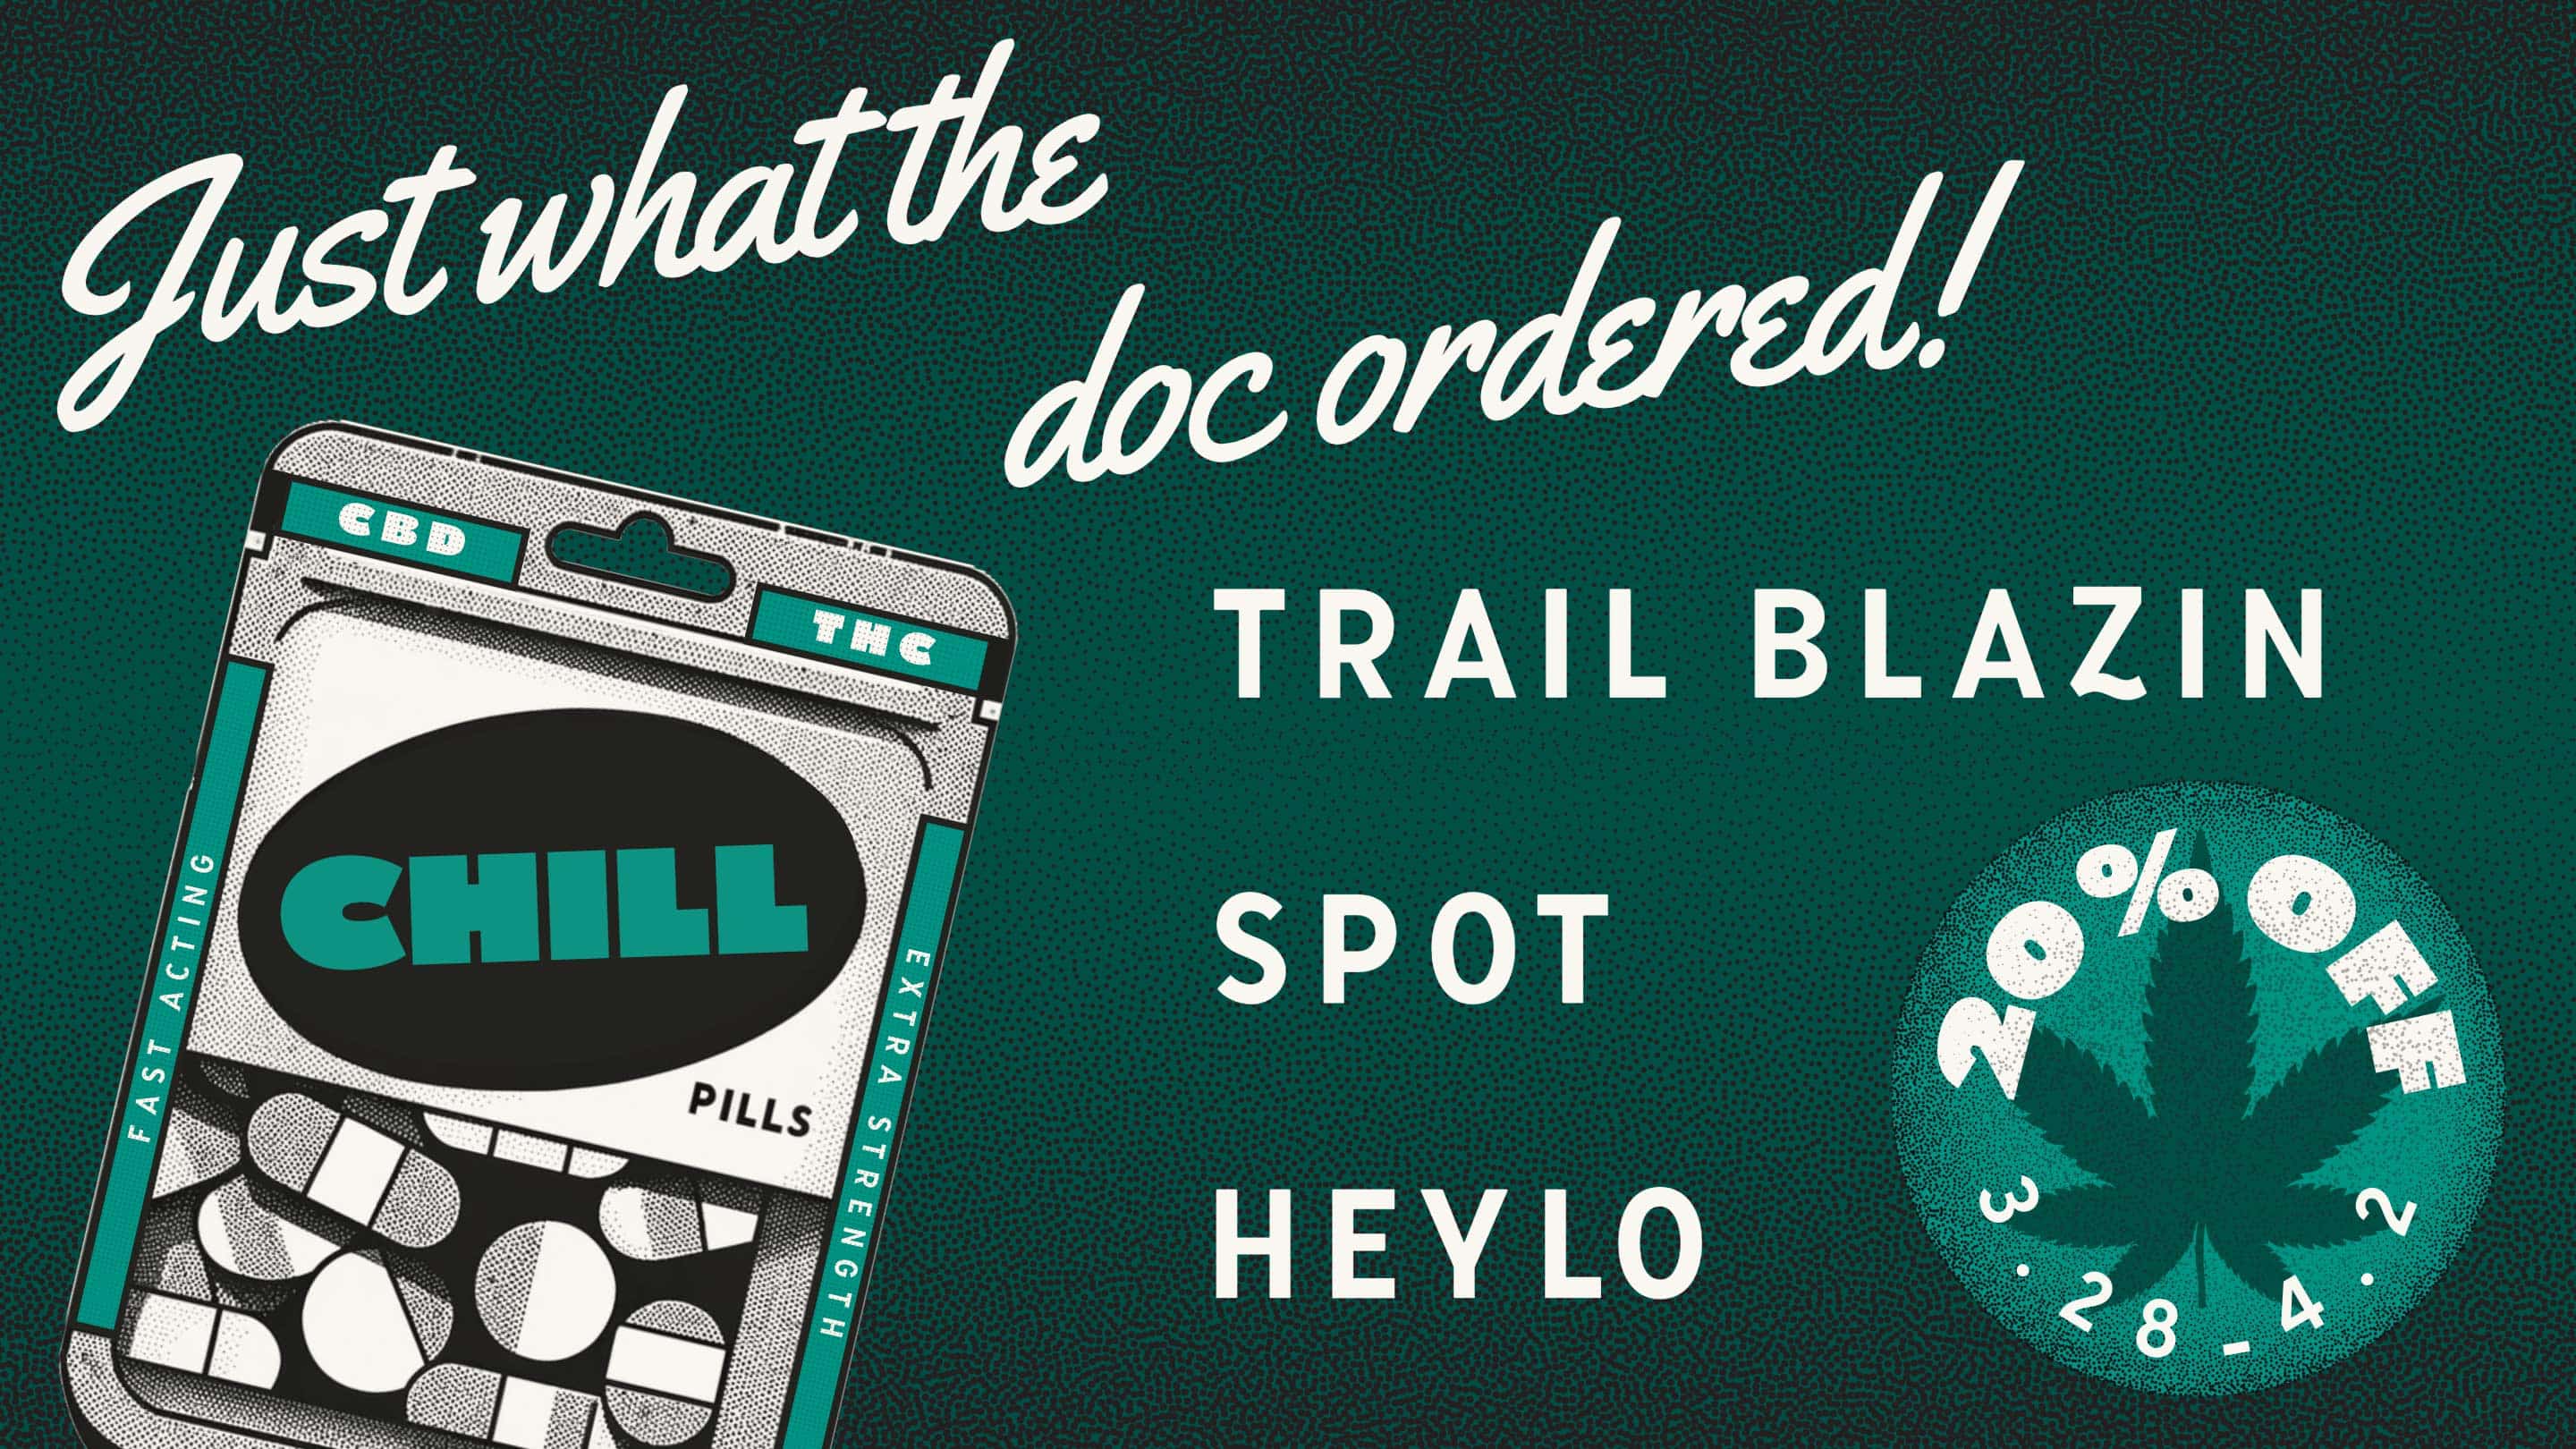 Take 20% off Trail Blazin, Spot, and Heylo now through April 2nd.